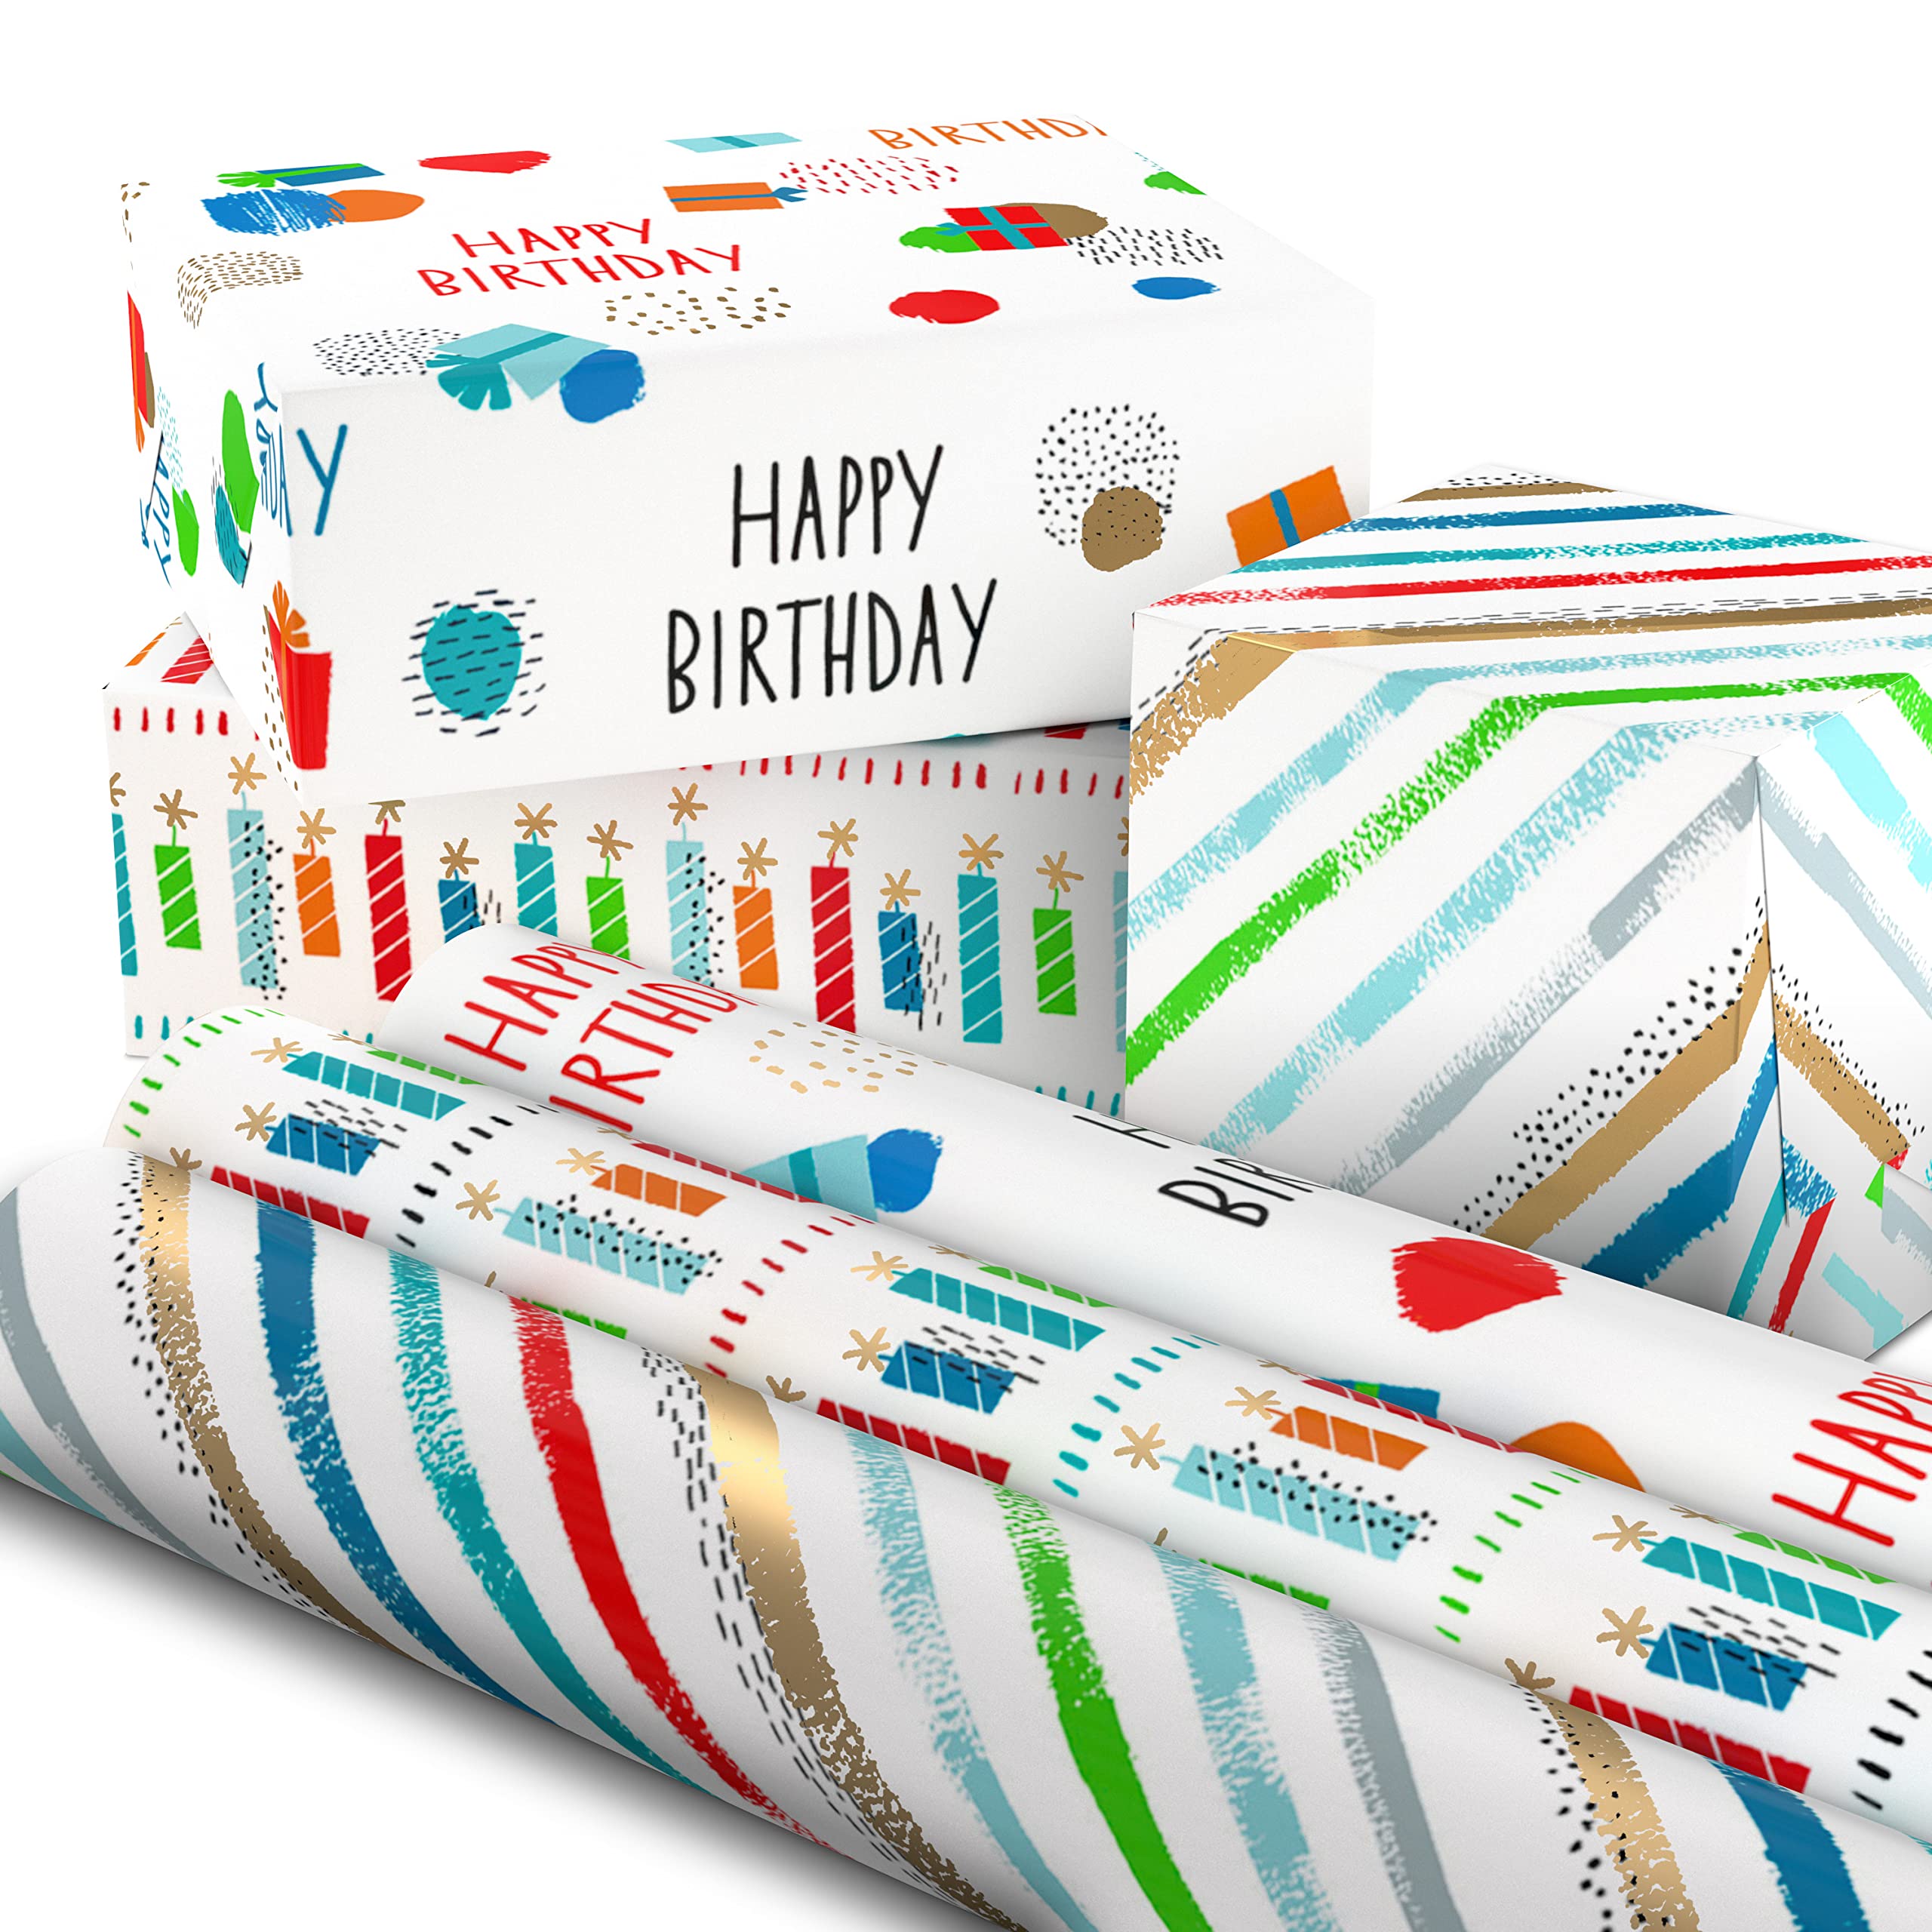 Hallmark Colorful Wrapping Paper Bundle with Cutlines on Reverse (6 Rolls: 115 Square Feet Total) Red, Blue, Yellow, Green, Rainbow Stripes, Polka Dots for Birthdays, Graduations, Father's Day